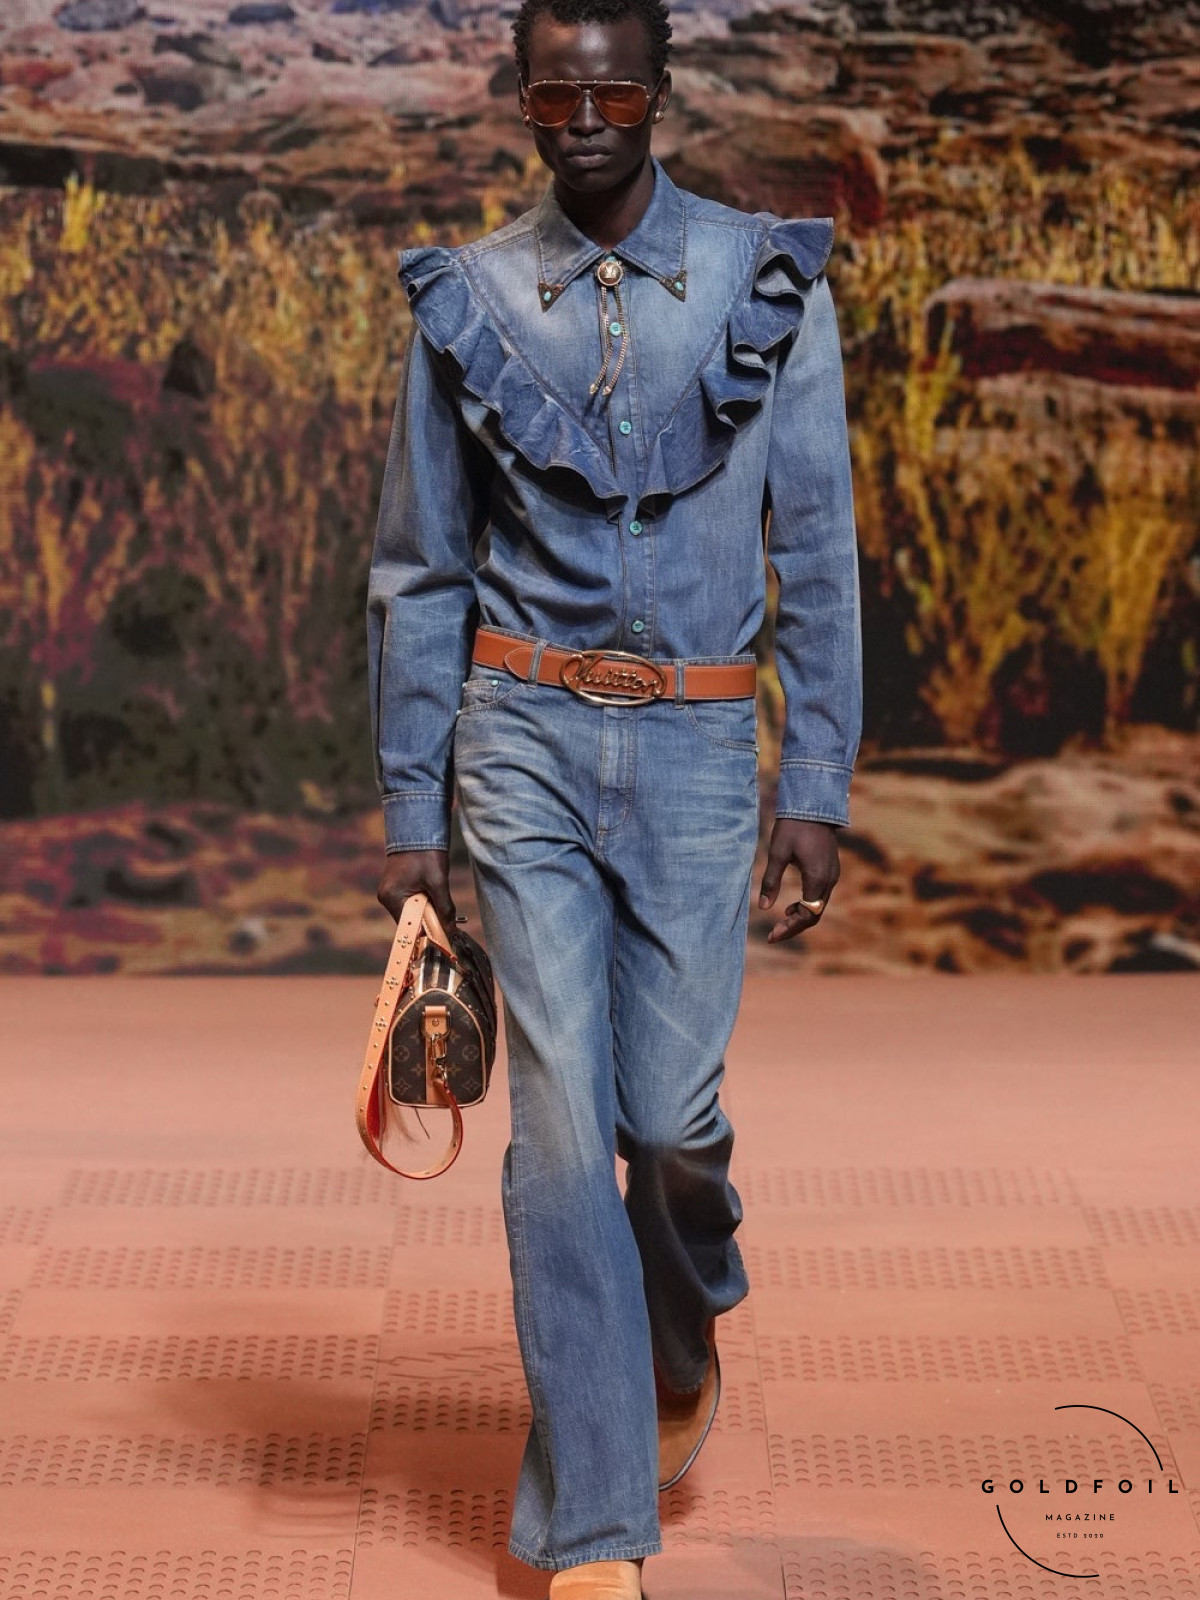 A model walking for Louis Vuitton wearing a double denim outfit